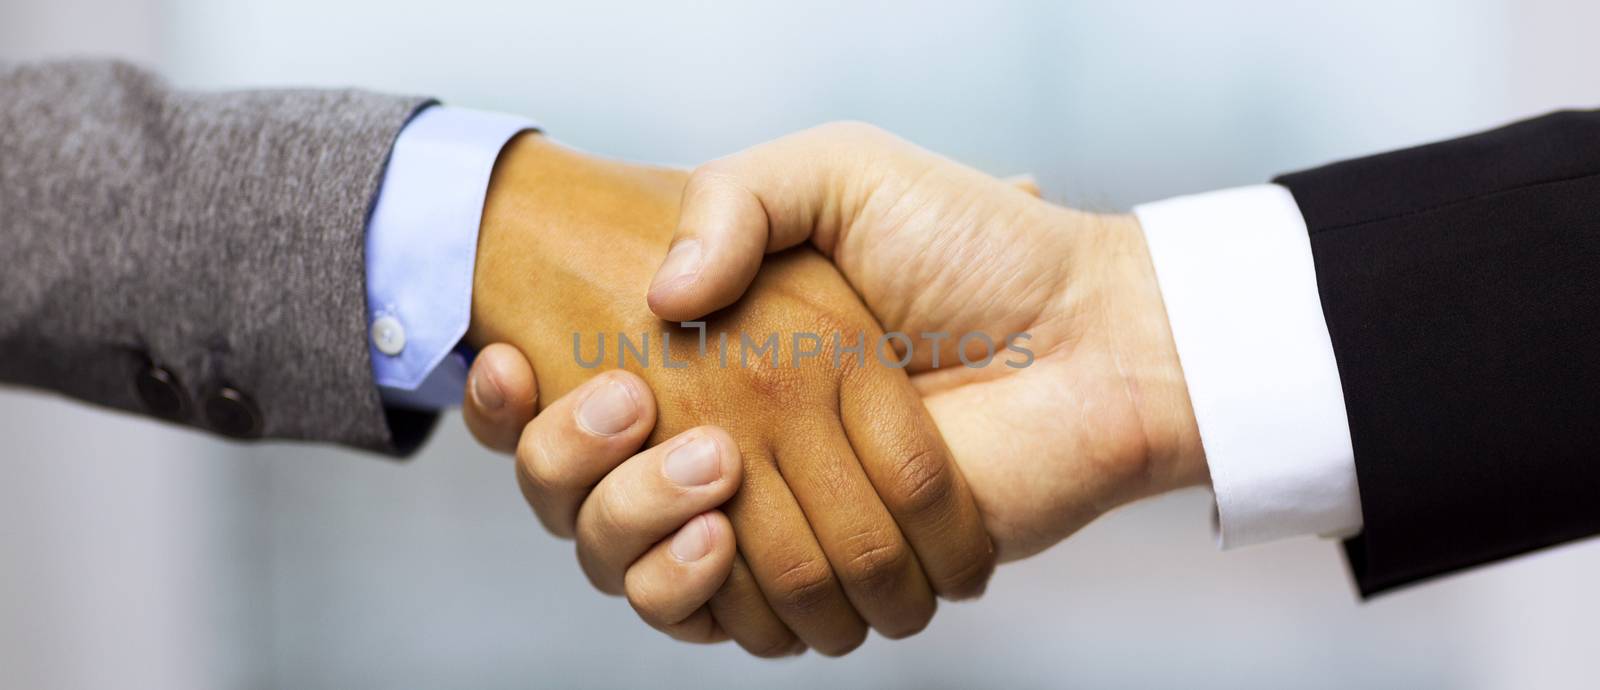 business and office concept - businessman and businesswoman showing shaking hands in office